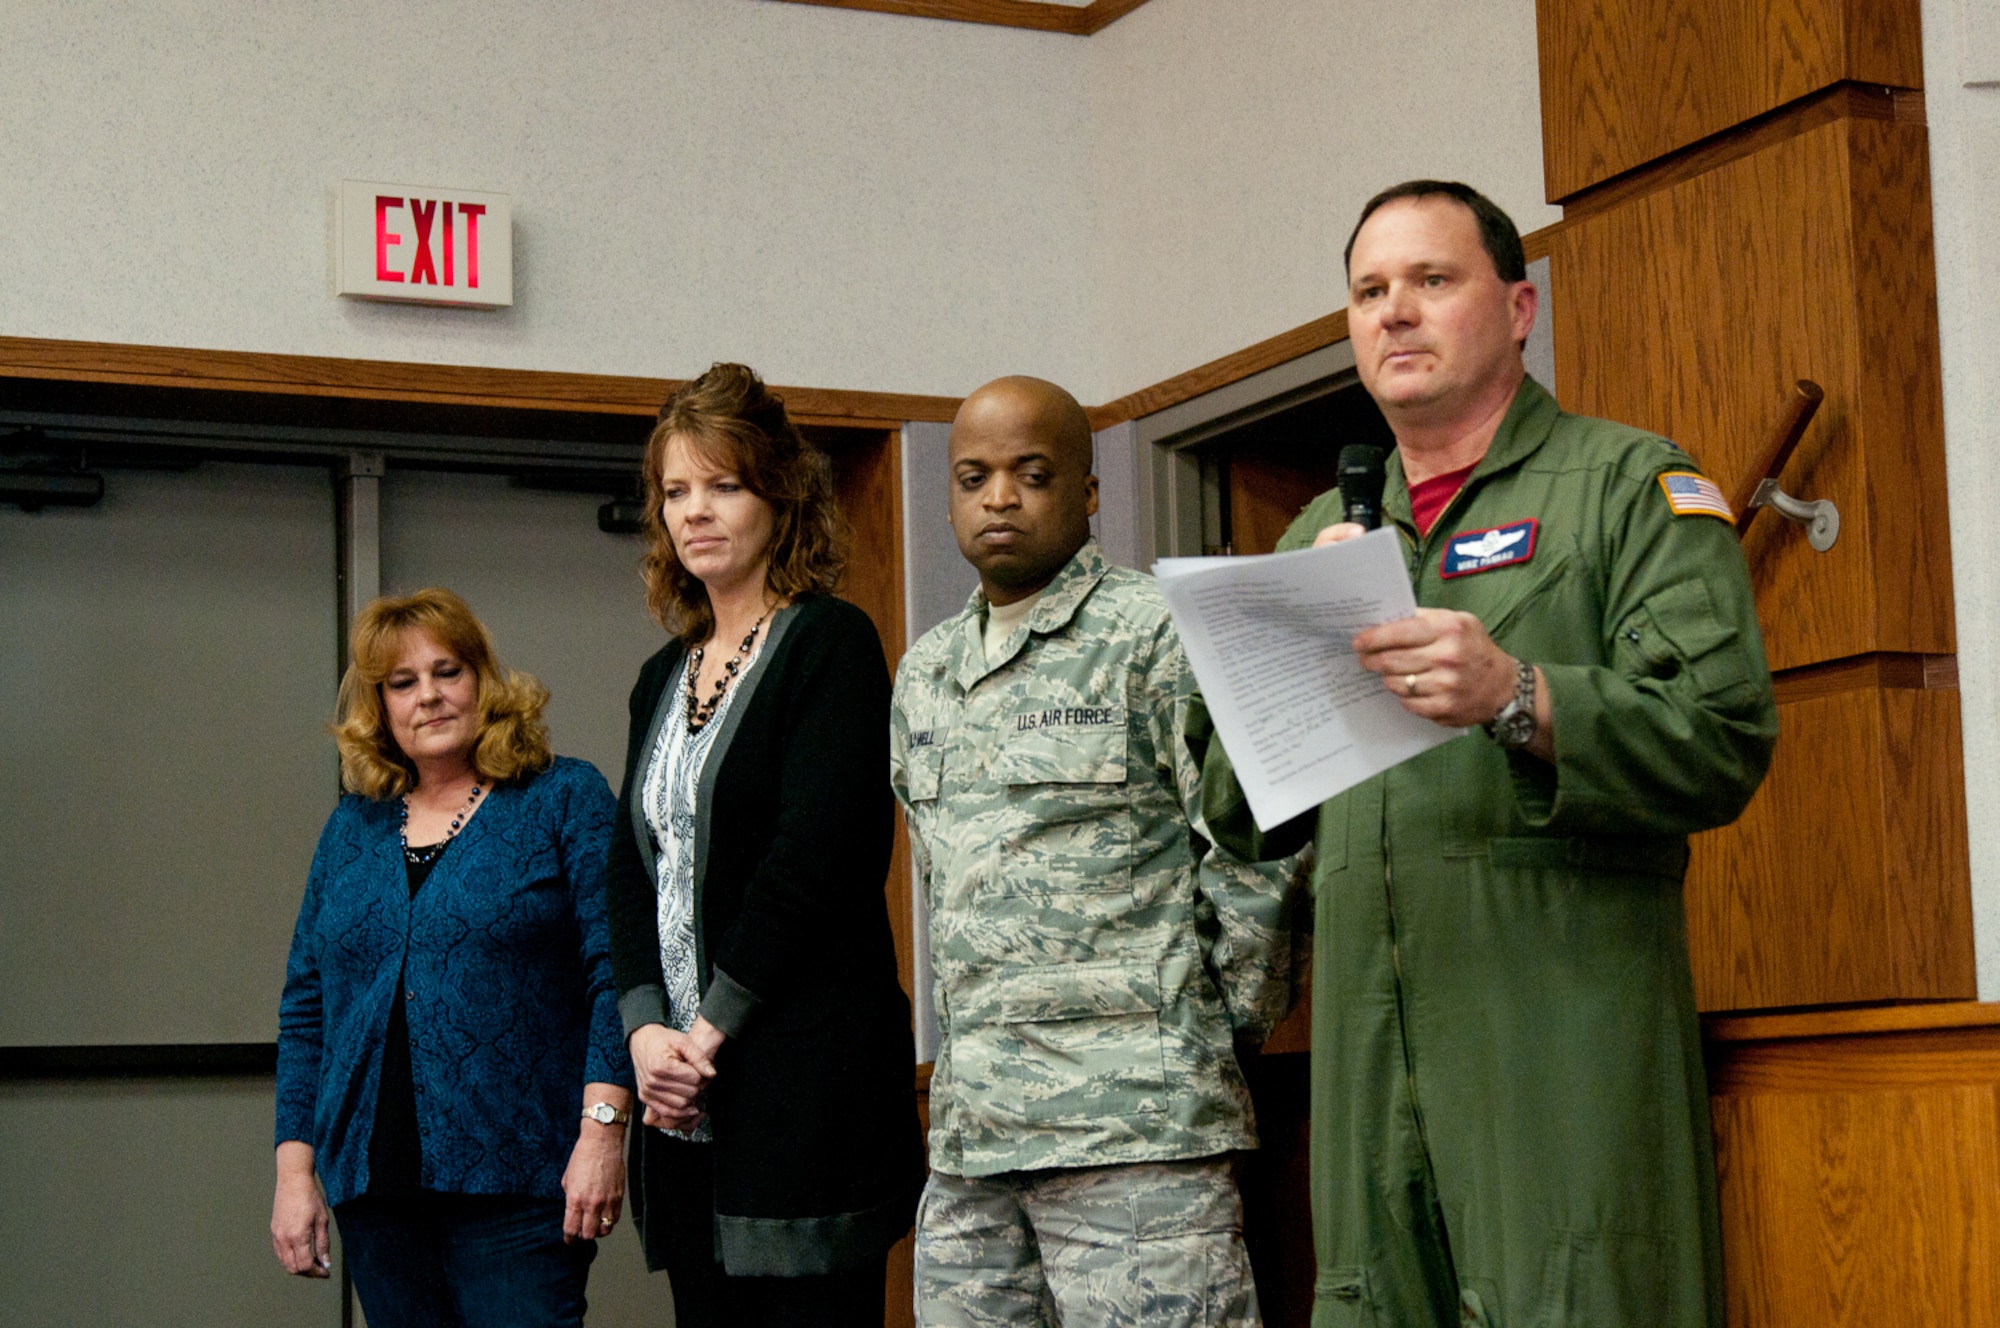 Members of the 241st Air Traffic Control squadron receive recognition for winning national awards from Col. Michael Pankau, commander 139th Airlift Wing, February 18, 2011. (U.S. Air Force photo by Master Sgt. Shannon Bond)